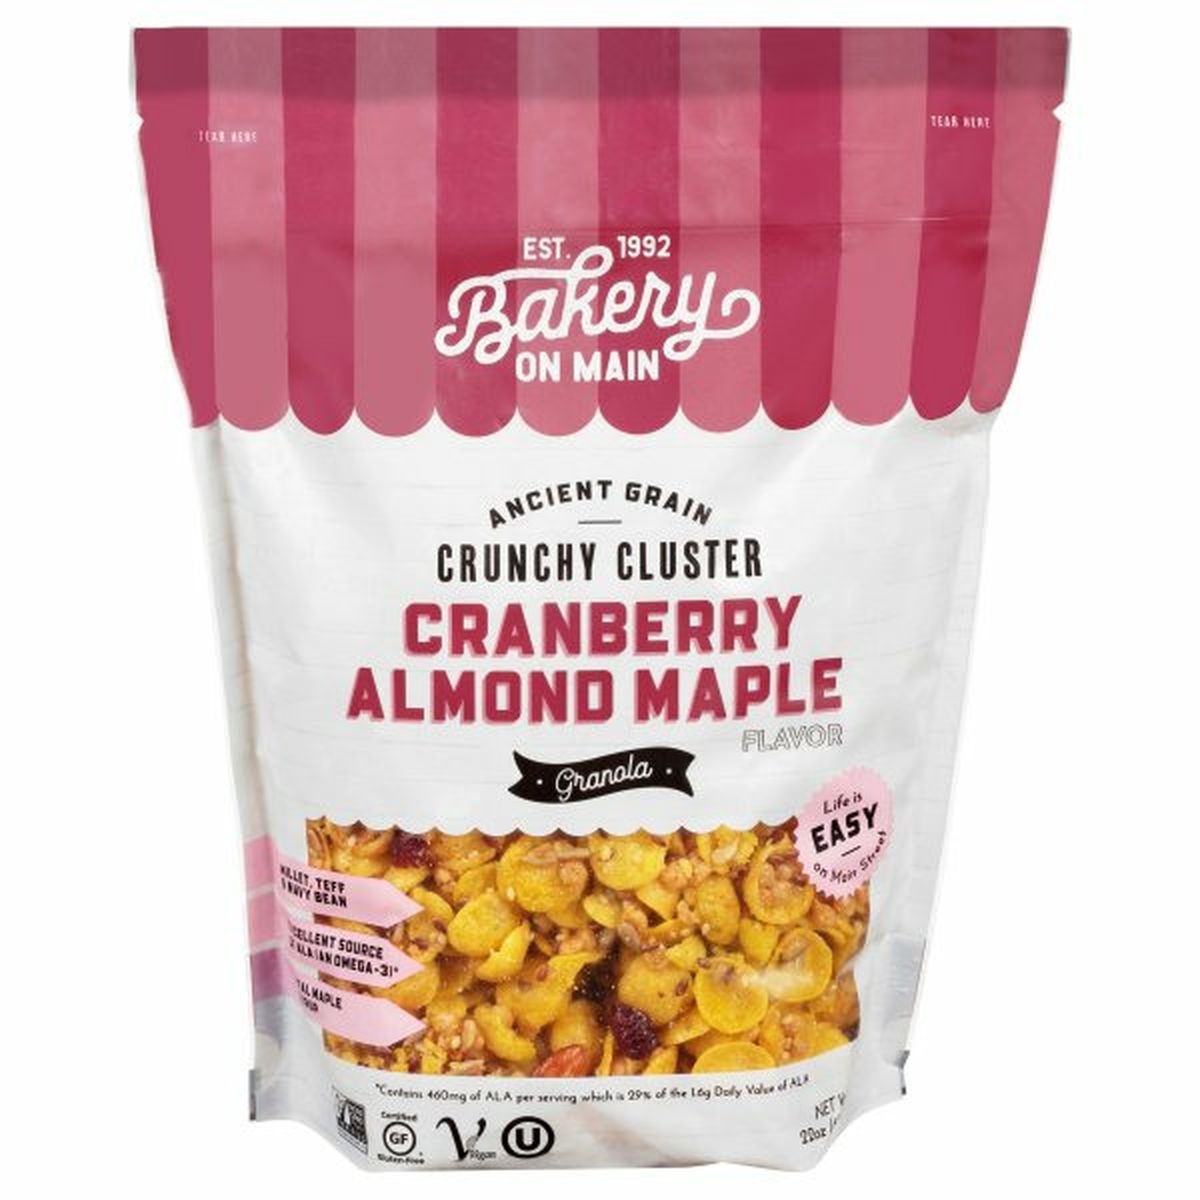 Calories in Bakery On Main Granola, Cranberry Almond Maple Flavor, Crunchy Cluster